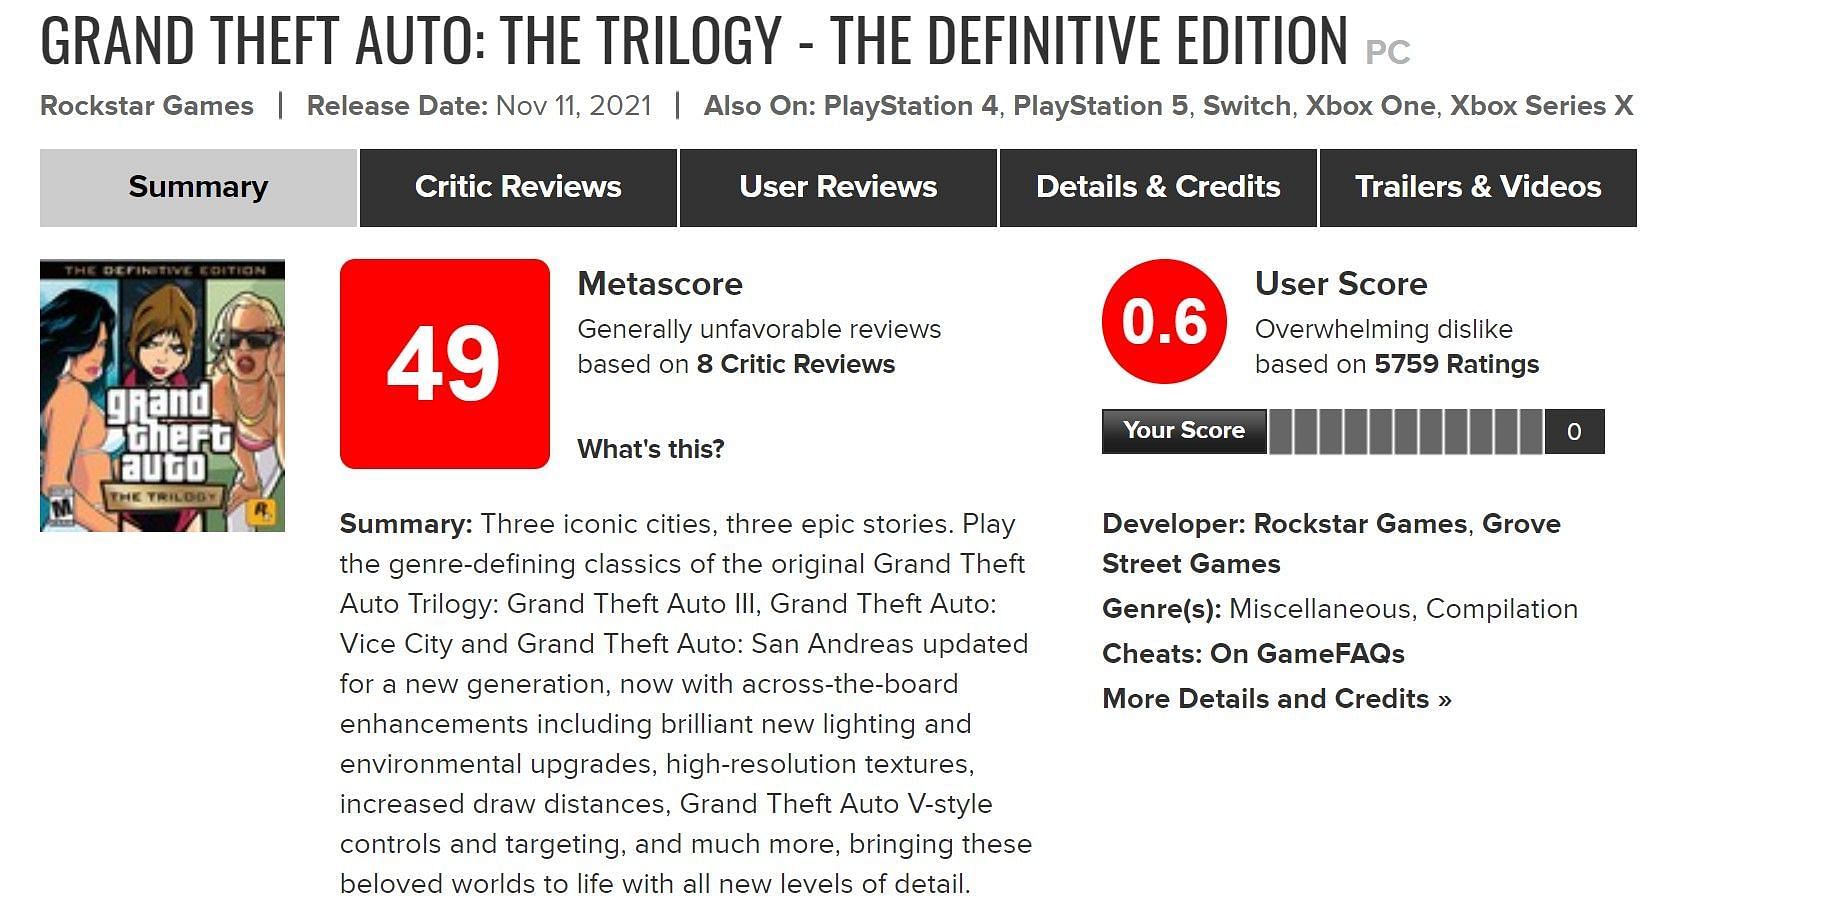 Grand Theft Auto: The Trilogy - The Definitive Edition - Metacritic